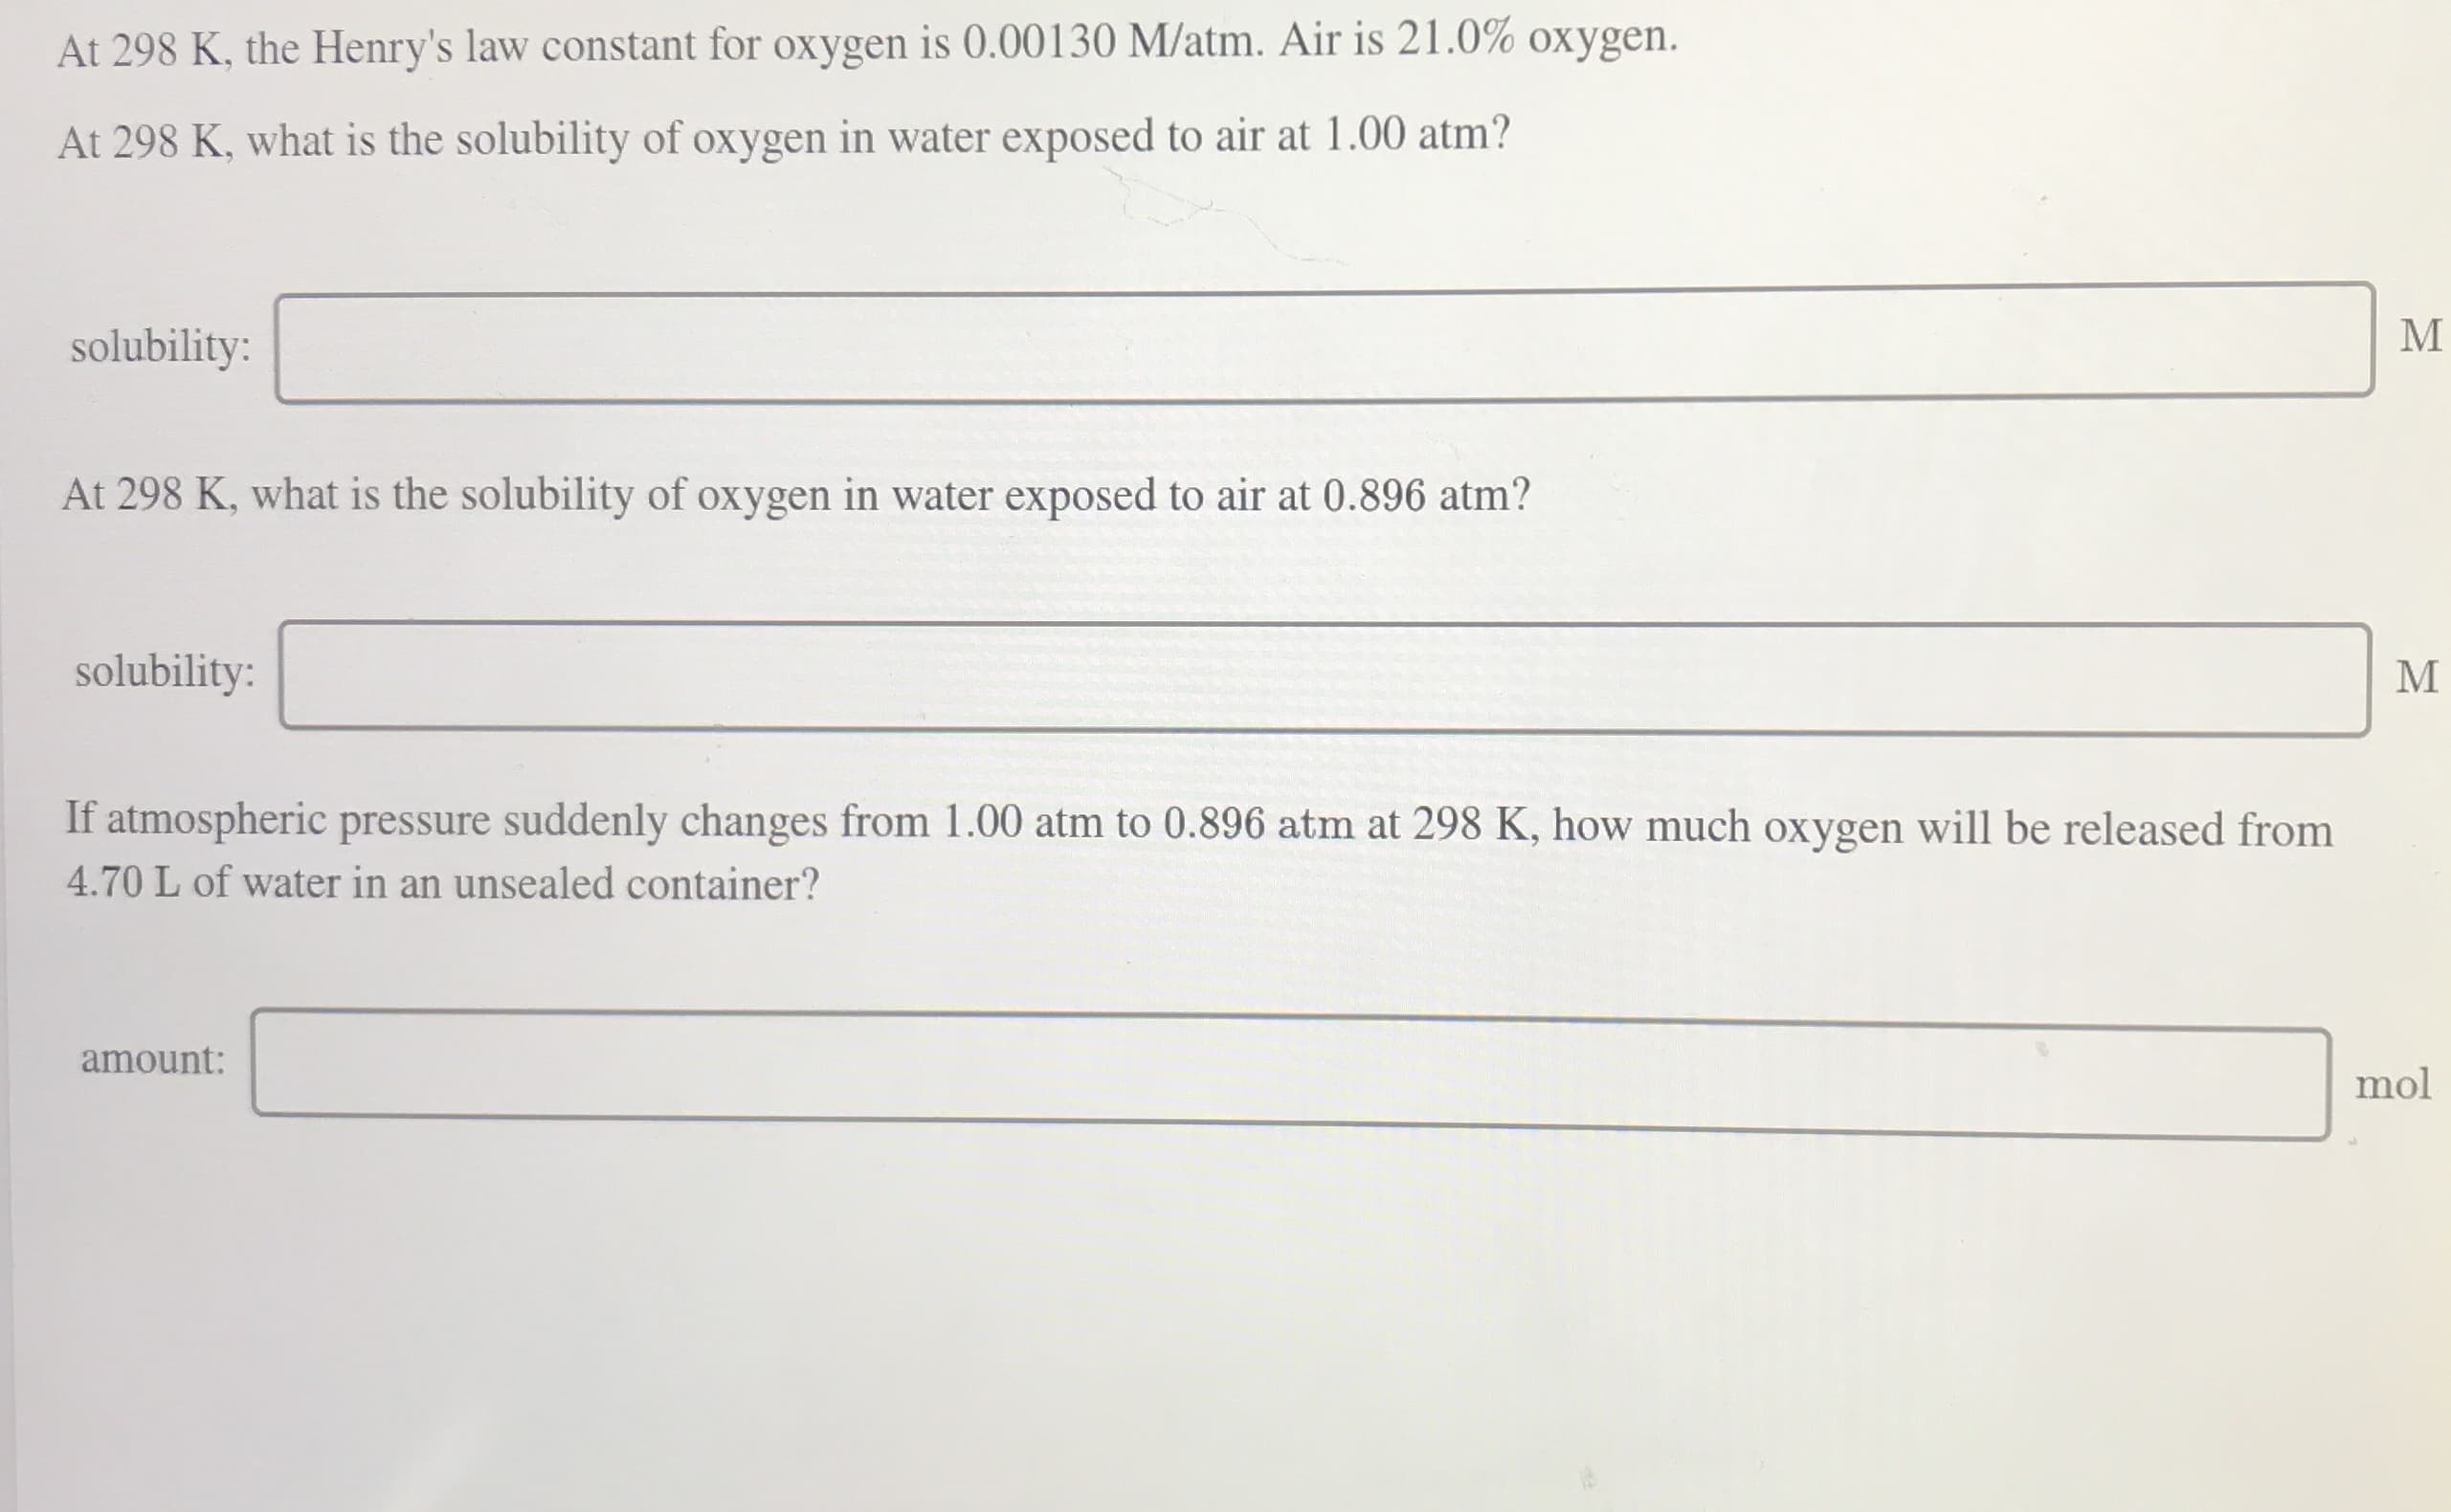 At 298 K, the Henry's law constant for oxygen is 0.00130 M/atm. Air is 21.0% oxygen.
At 298 K, what is the solubility of oxygen in water exposed to air at 1.00 atm?
solubility:
At 298 K, what is the solubility of oxygen in water exposed to air at 0.896 atm?
solubility:
If atmospheric pressure suddenly changes from 1.00 atm to 0.896 atm at 298 K, how much oxygen will be released from
4.70 L of water in an unsealed container?
amount:
mol
